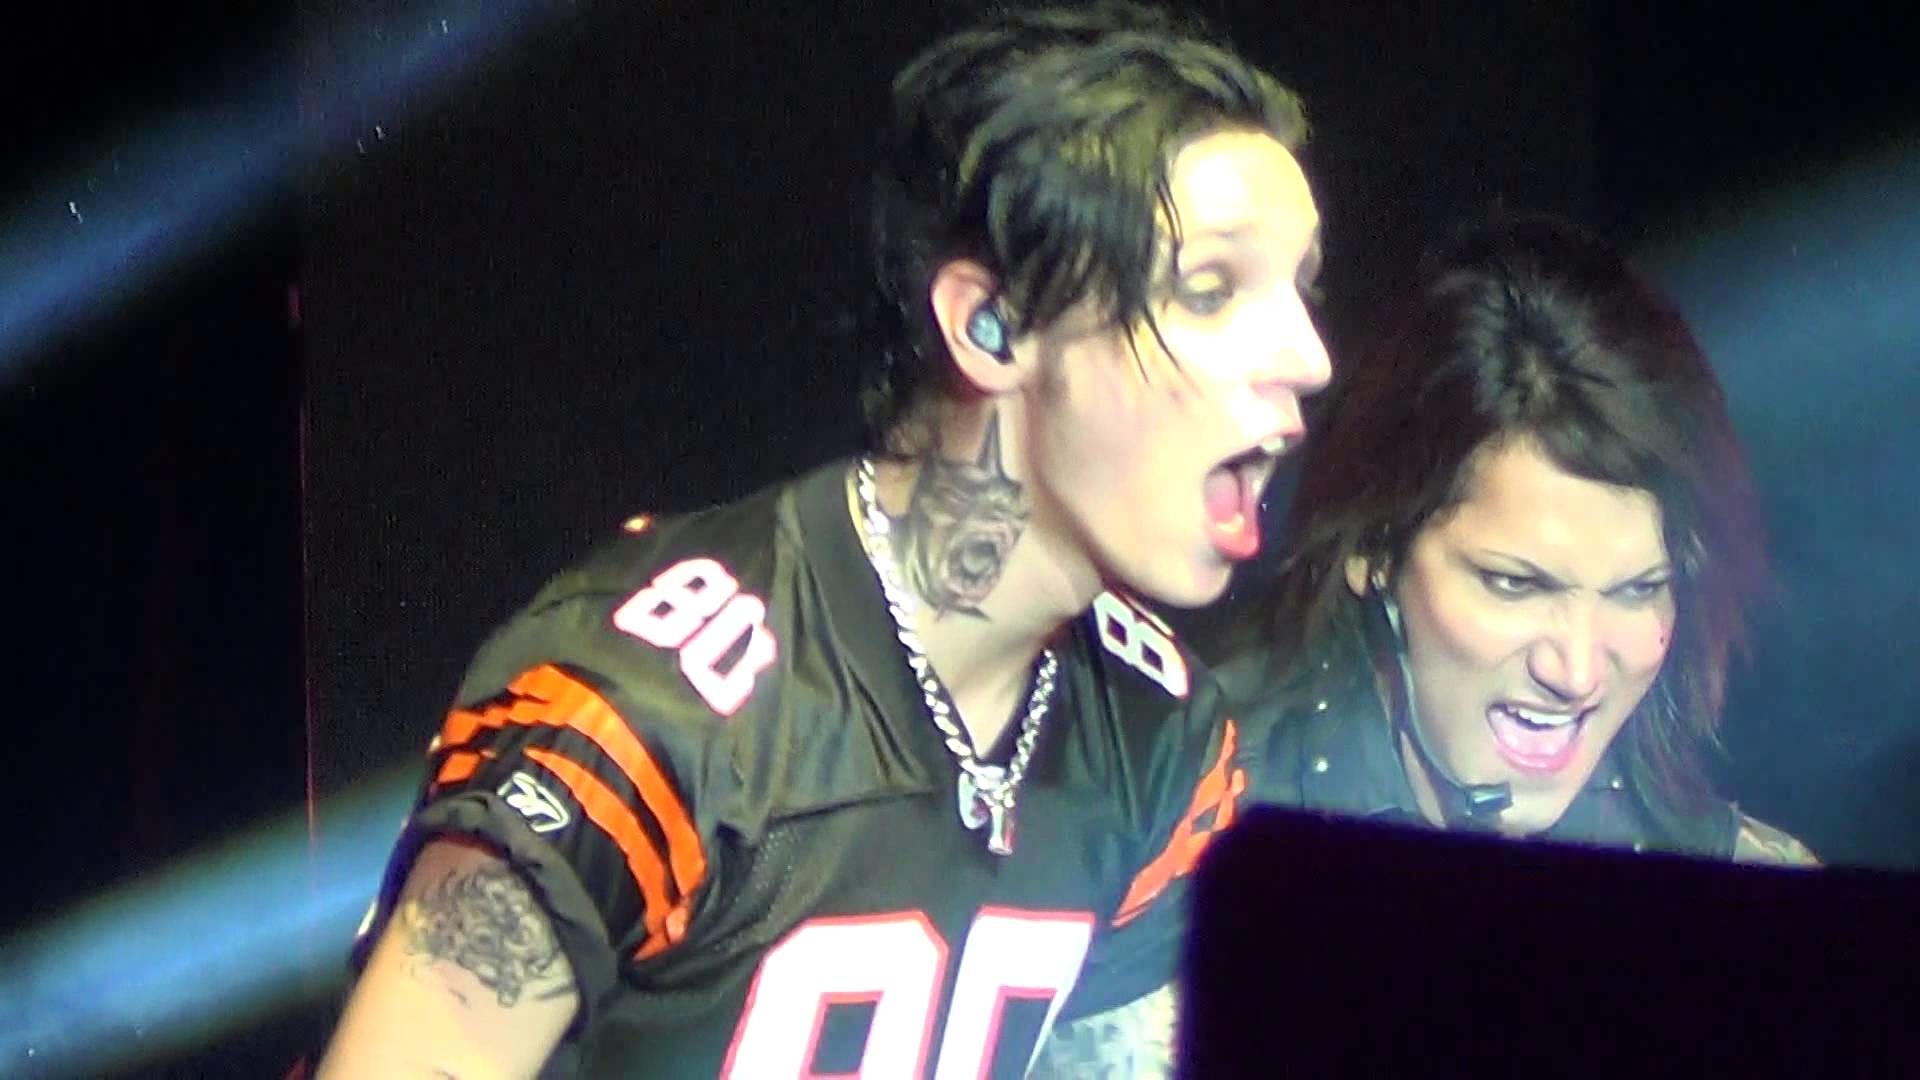 1920x1080 Black Veil Brides IN THE END Live October 2014 HD